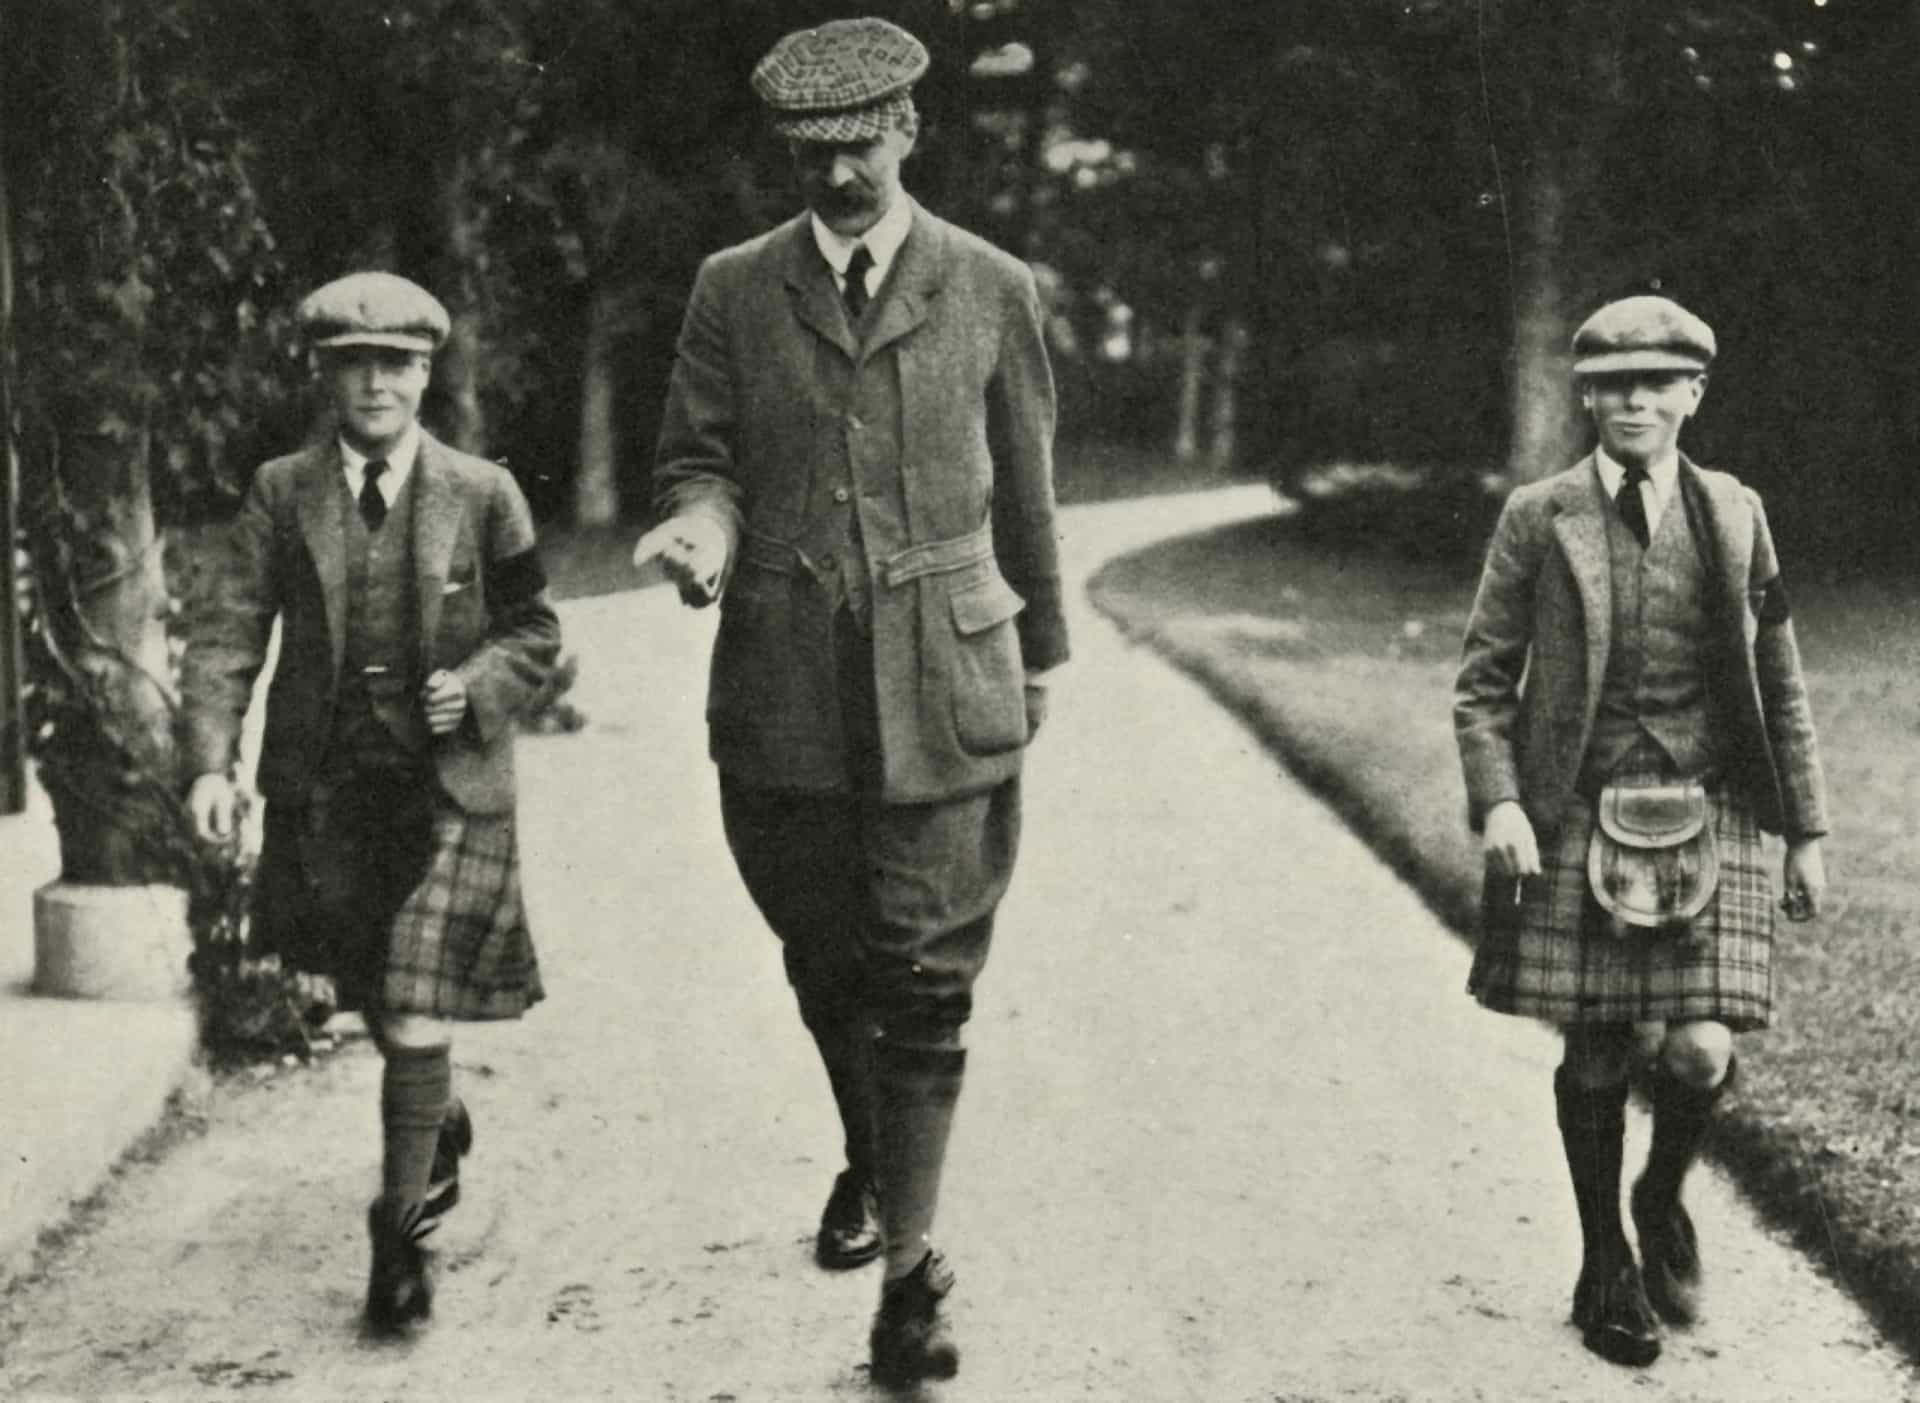 <p>Prince Albert, the future King George VI, and Prince Edward, who as King Edward VIII would <a href="https://www.starsinsider.com/celebrity/259620/the-dark-secrets-of-the-british-royal-family" rel="noopener">abdicate</a> the British throne in 1936, are seen pictured with their tutor at Balmoral, Scotland, in 1911.</p>